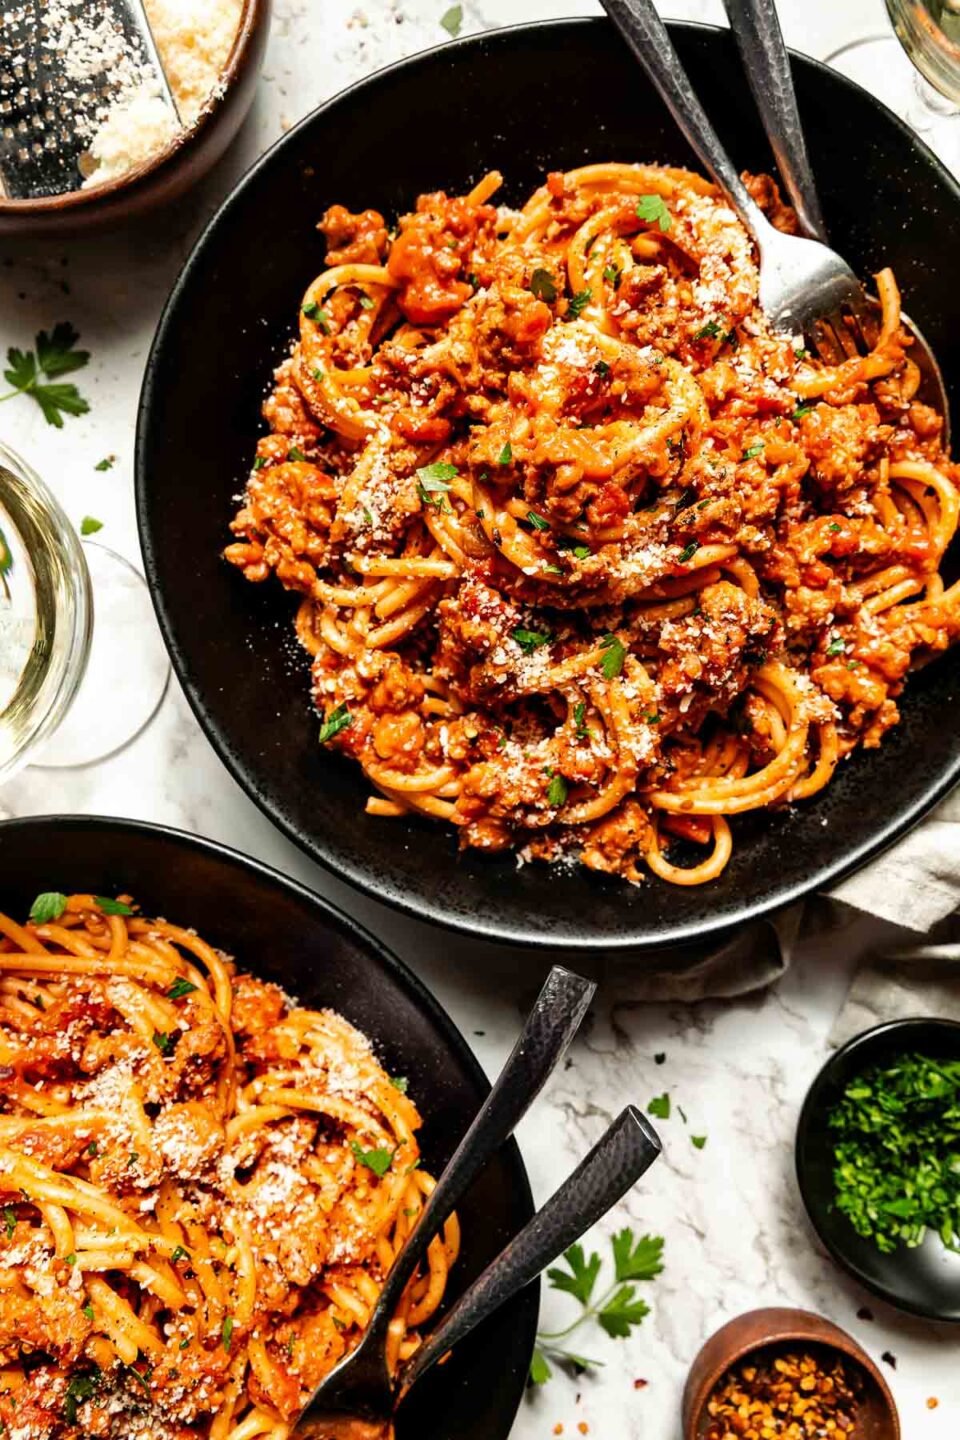 An overhead shot of two black bowls of chicken bolognese pasta atop a white marbled surface. A glass of wine and small bowls of parsley, red pepper flakes and grated parmesan sit beside the bowls.